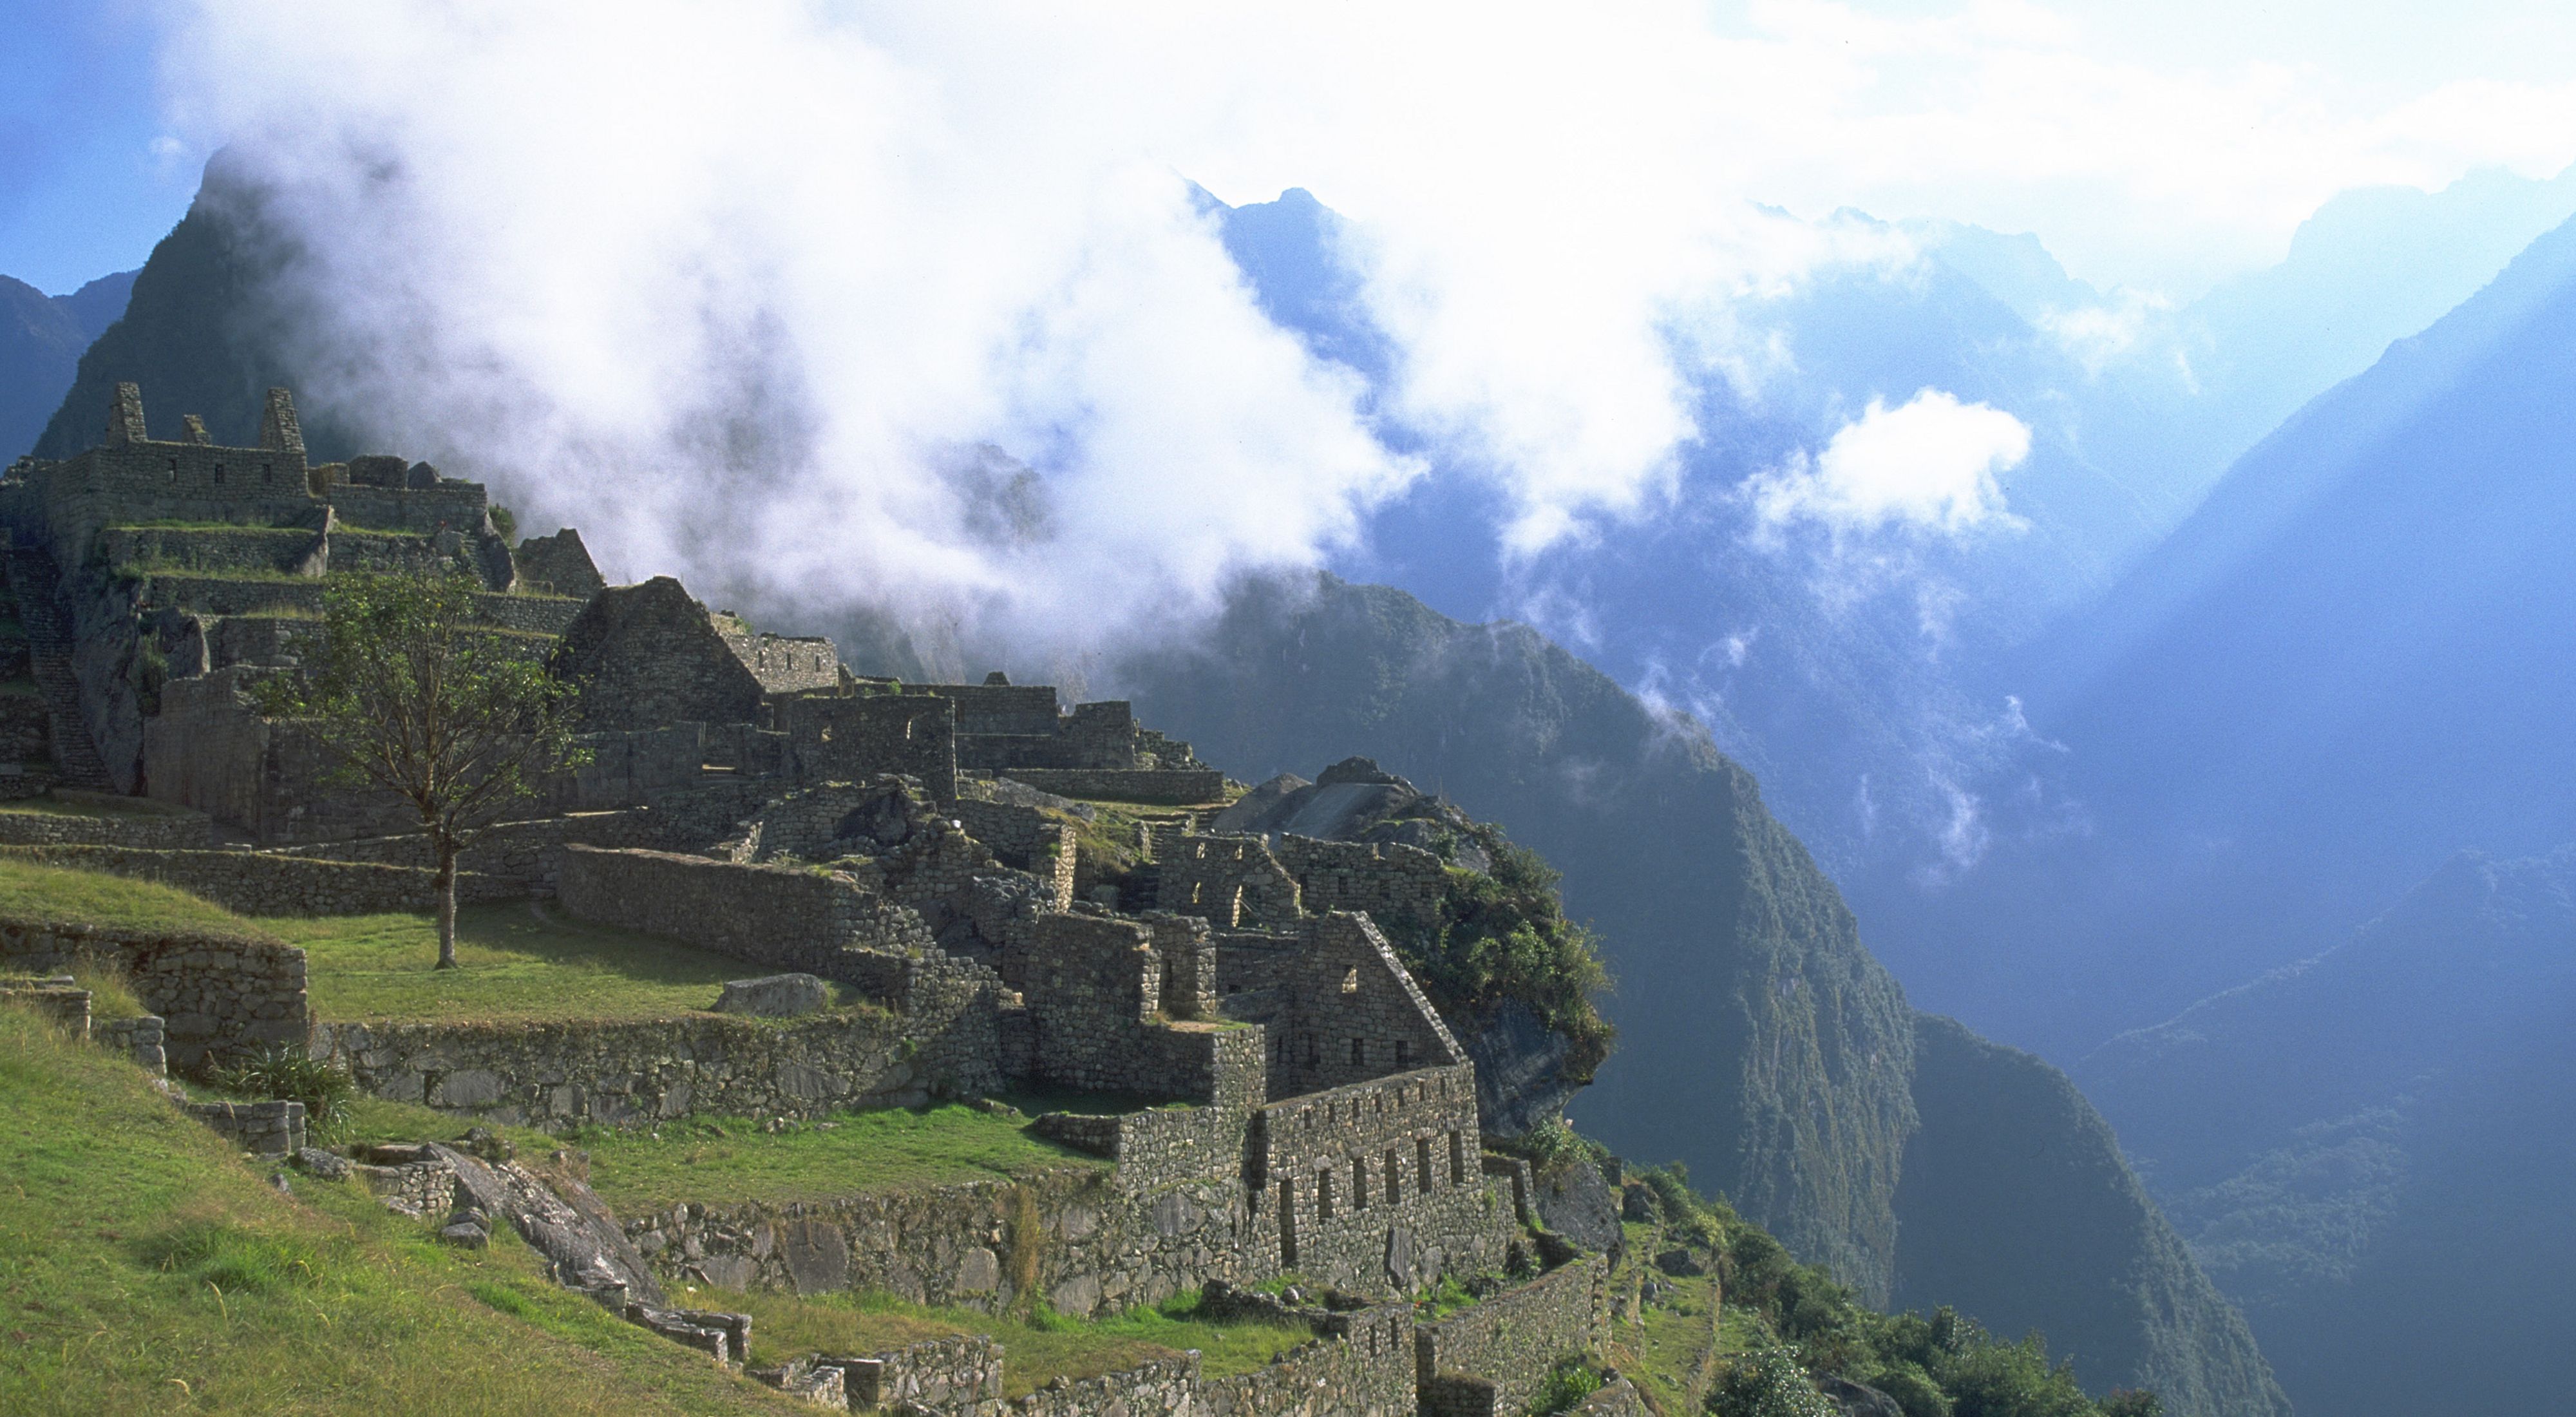 A view of the ancient Incan city of Machu Picchu with